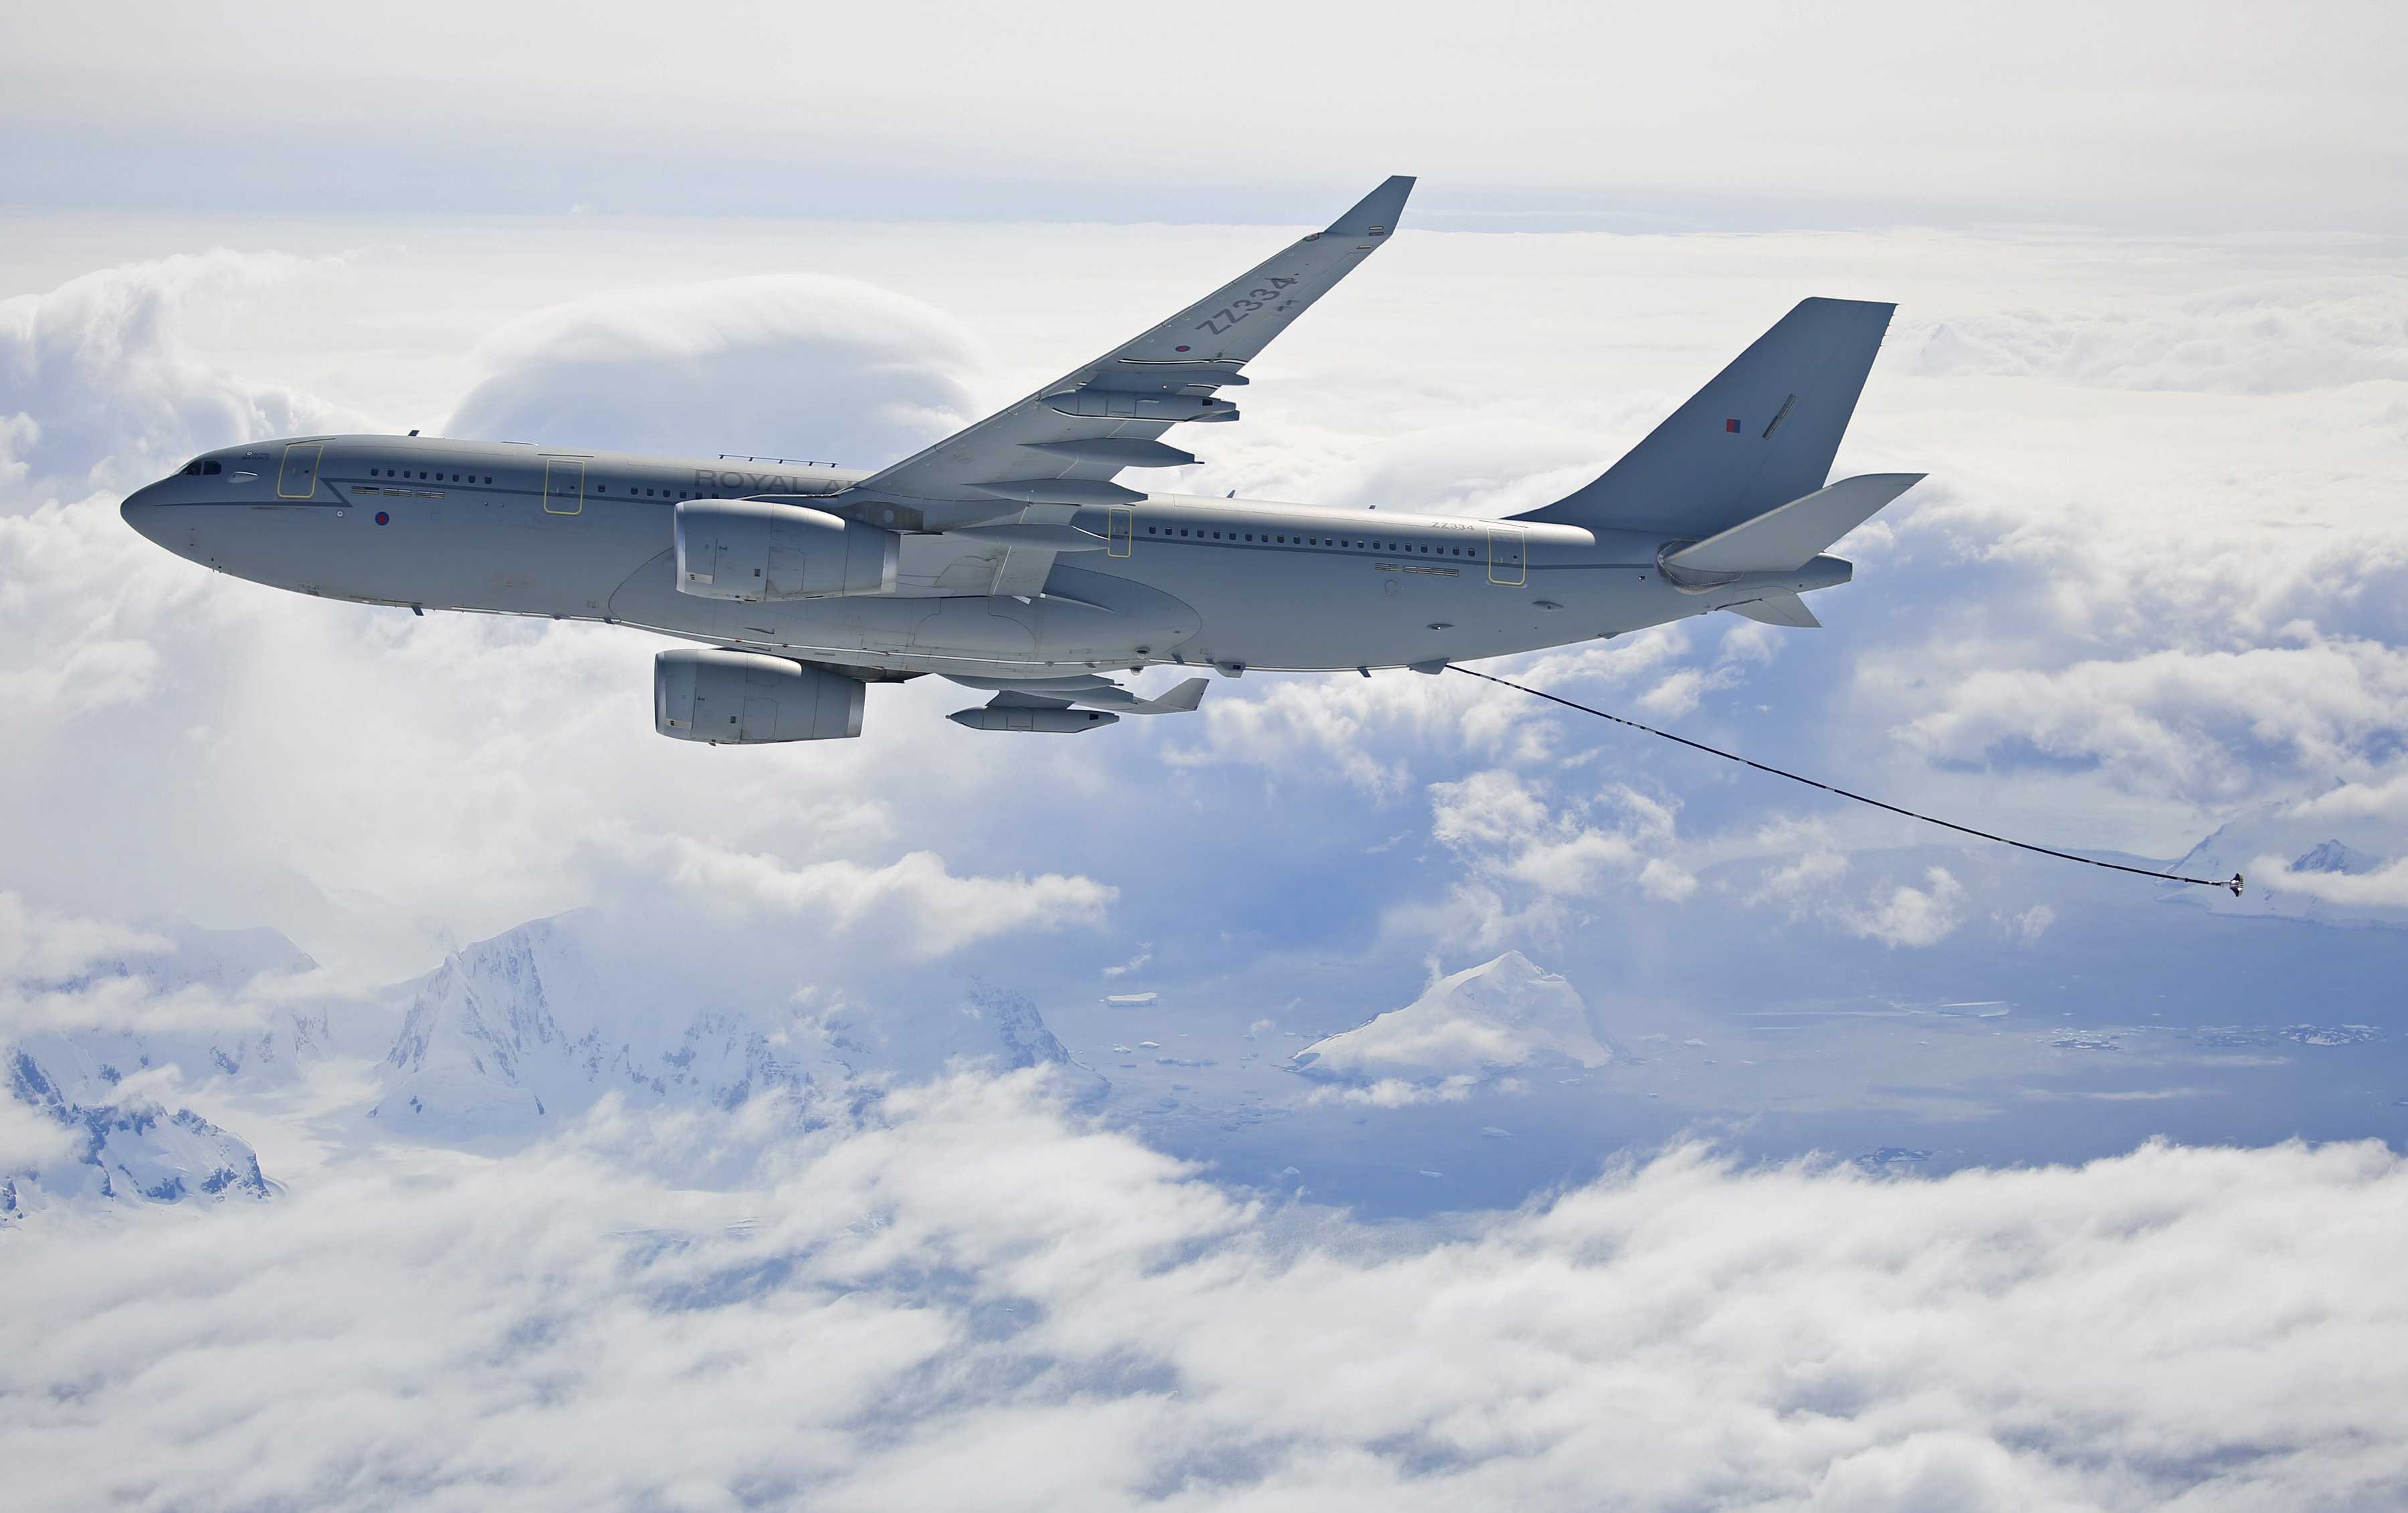 Image shows RAF carrier aircraft flying through clouds while being refuelled.